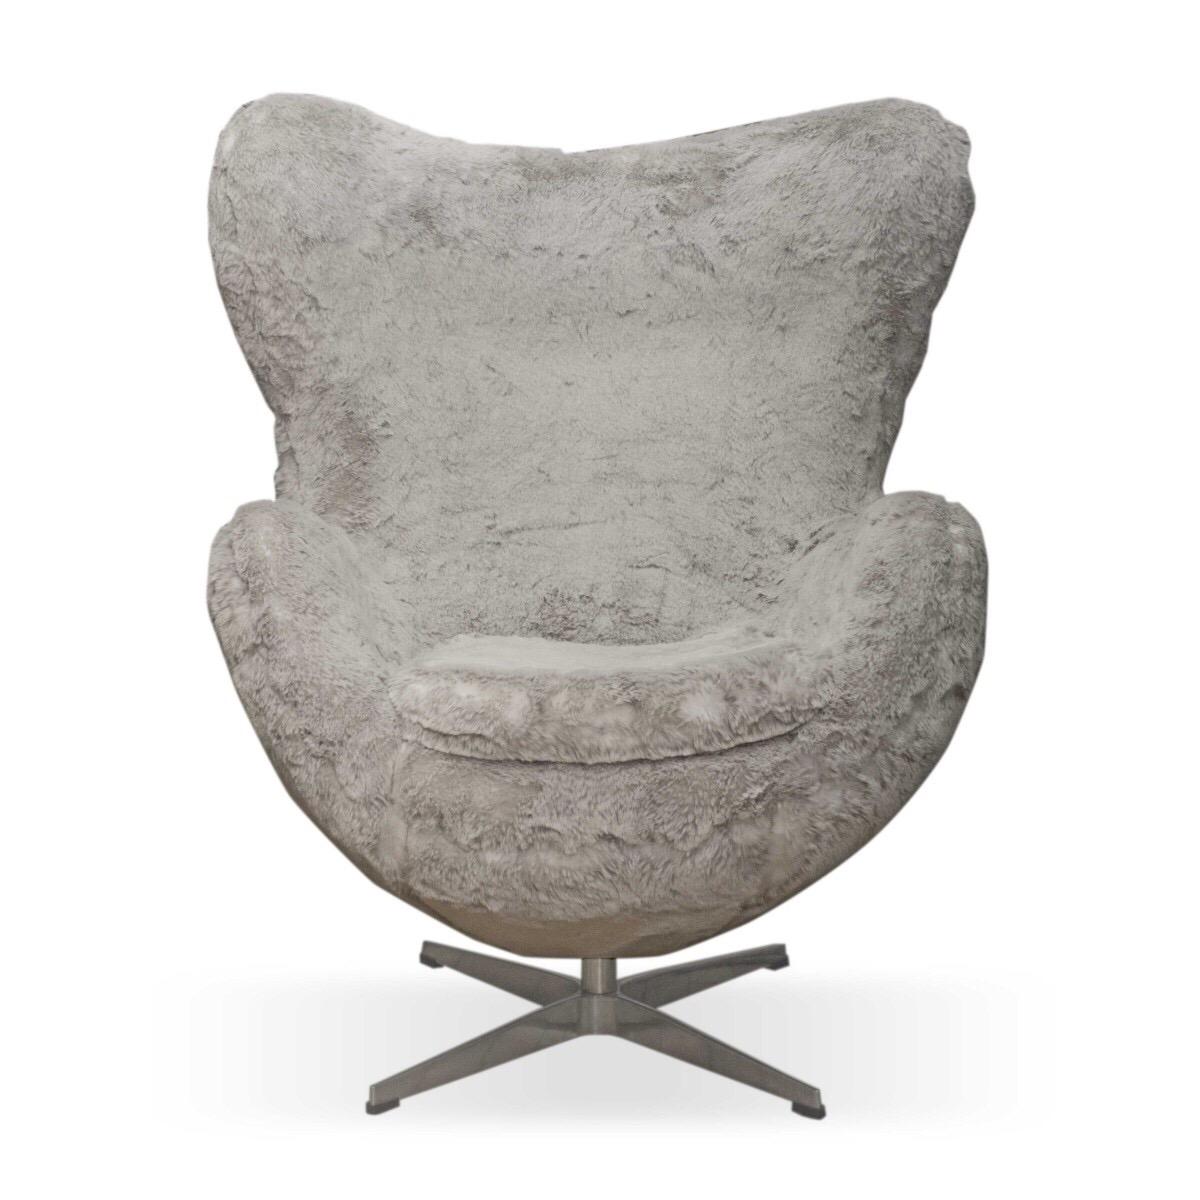 A vintage Egg chair by Arne Jacobsen for Fritz Hansen, Denmark, circa 1990.
Upholstered in gray faux sheepskin.

Dimensions:
34 inches W x 31 inches D x 43 inches H x 19 inches seat H x 26 inches arm H.